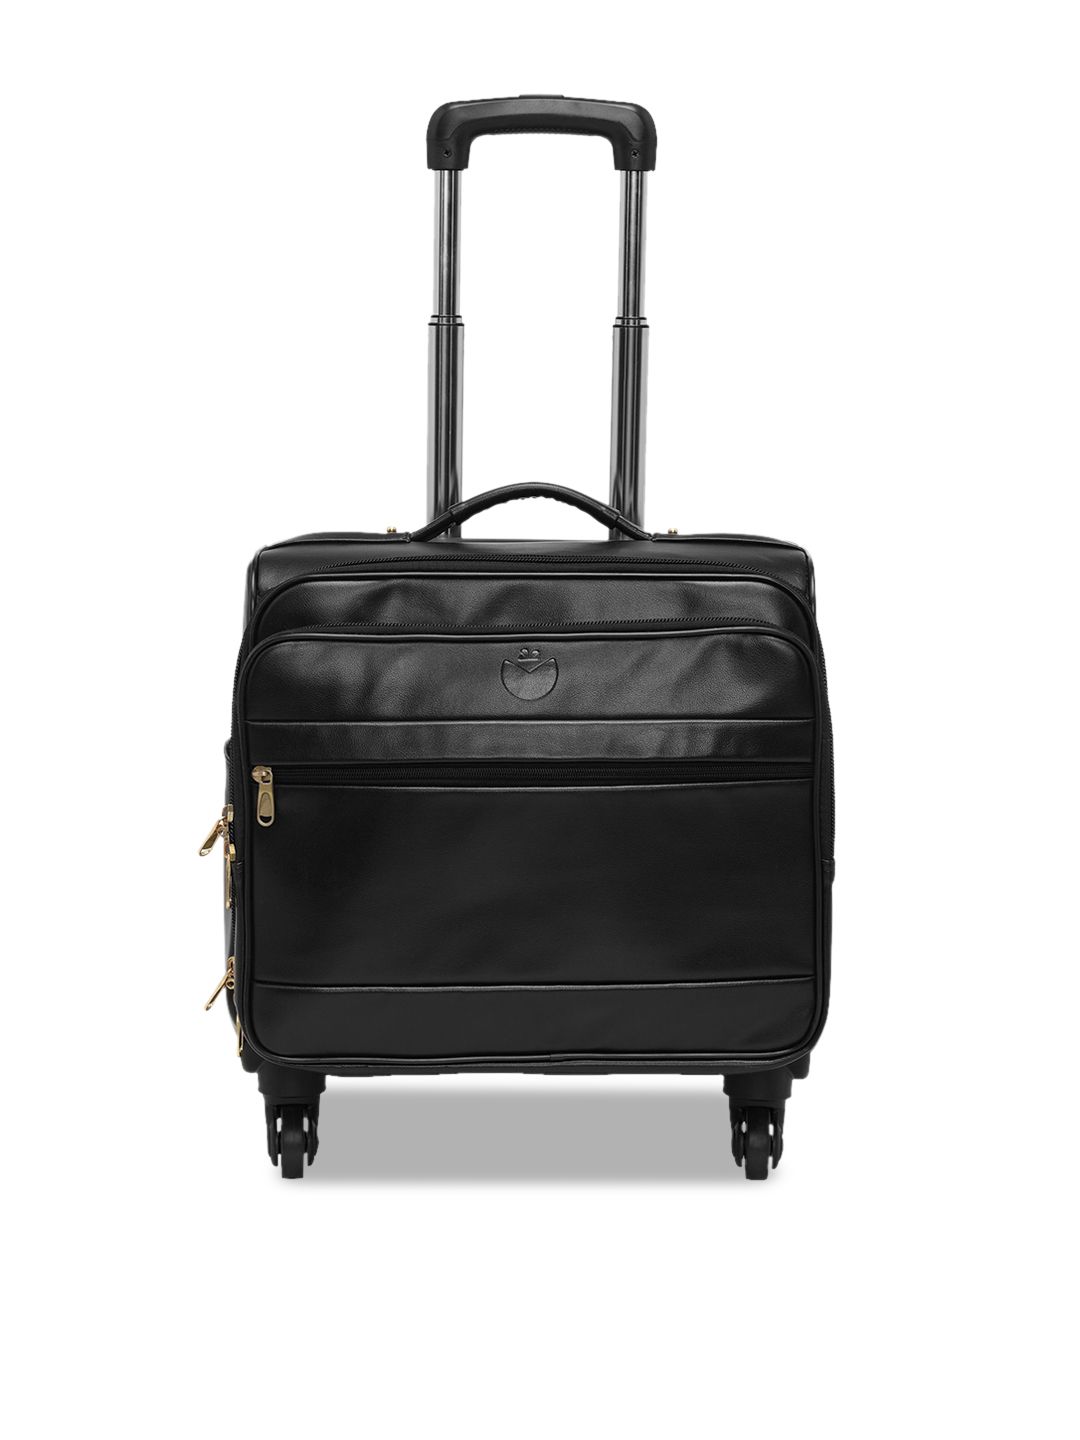 MBOSS Black Solid Soft-Sided Cabin Laptop Overnighter Trolley Suitcase Price in India